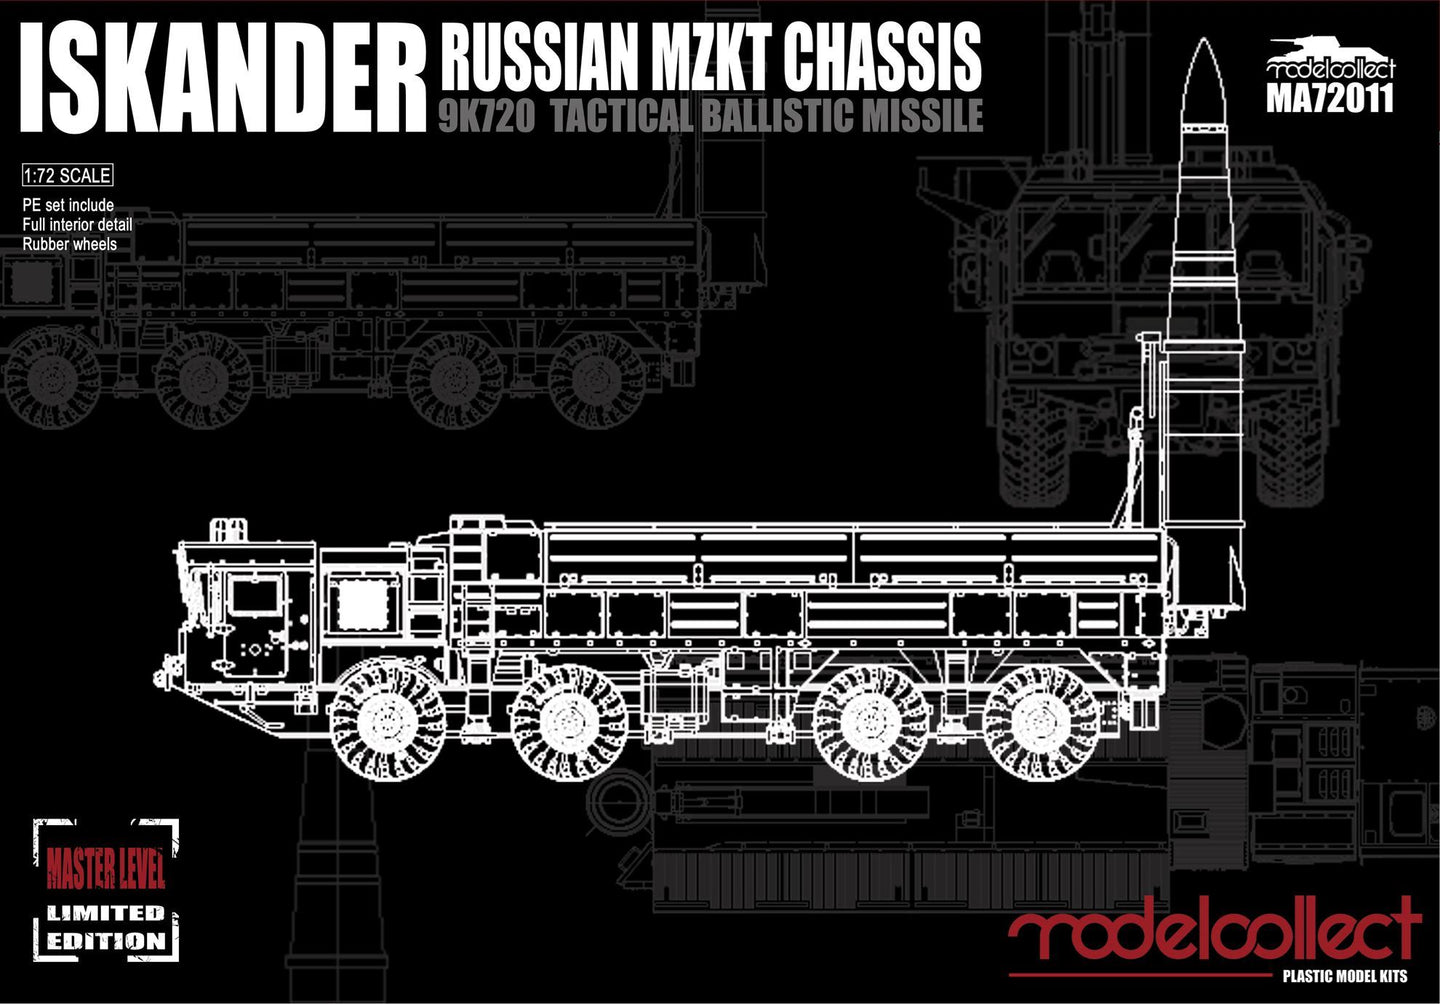 Modelcollect 1/72 Russian Iskander Mzkt Chassis 9K720 Tactical Ballistic Missile MA72011